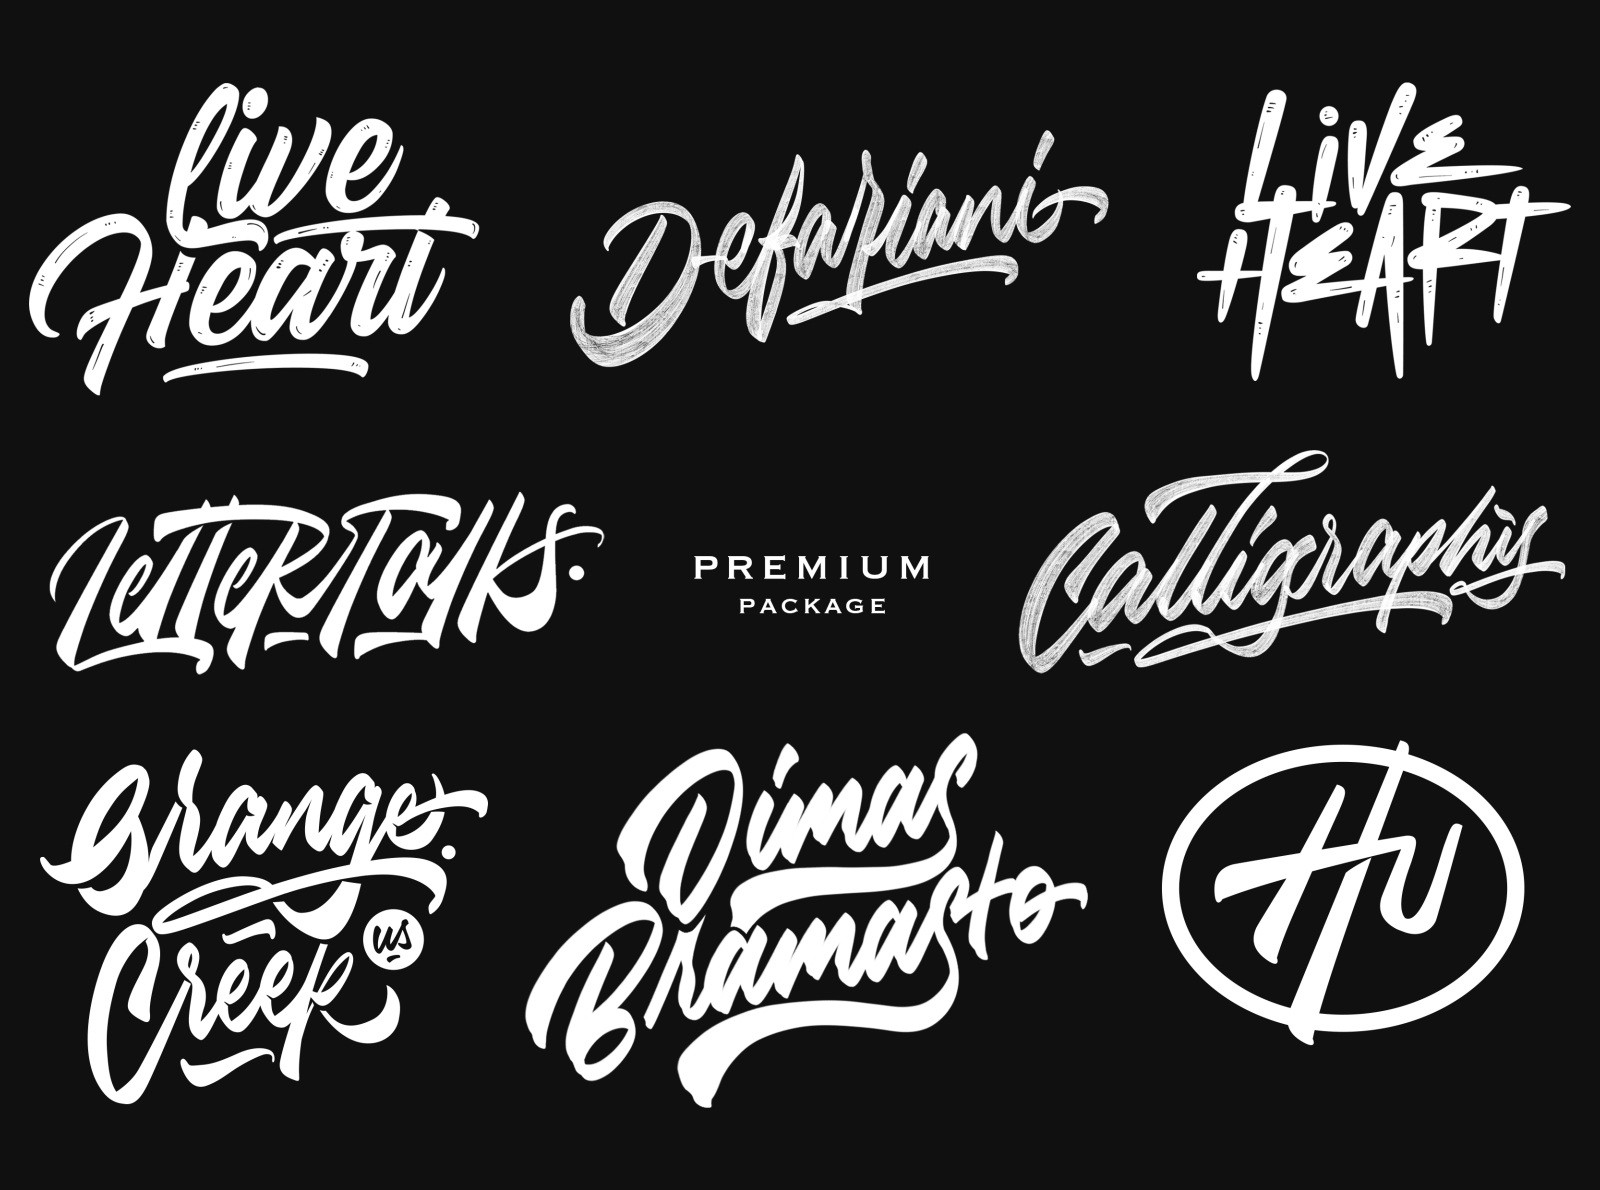 Calligraphy work by Enggal Mukti on Dribbble